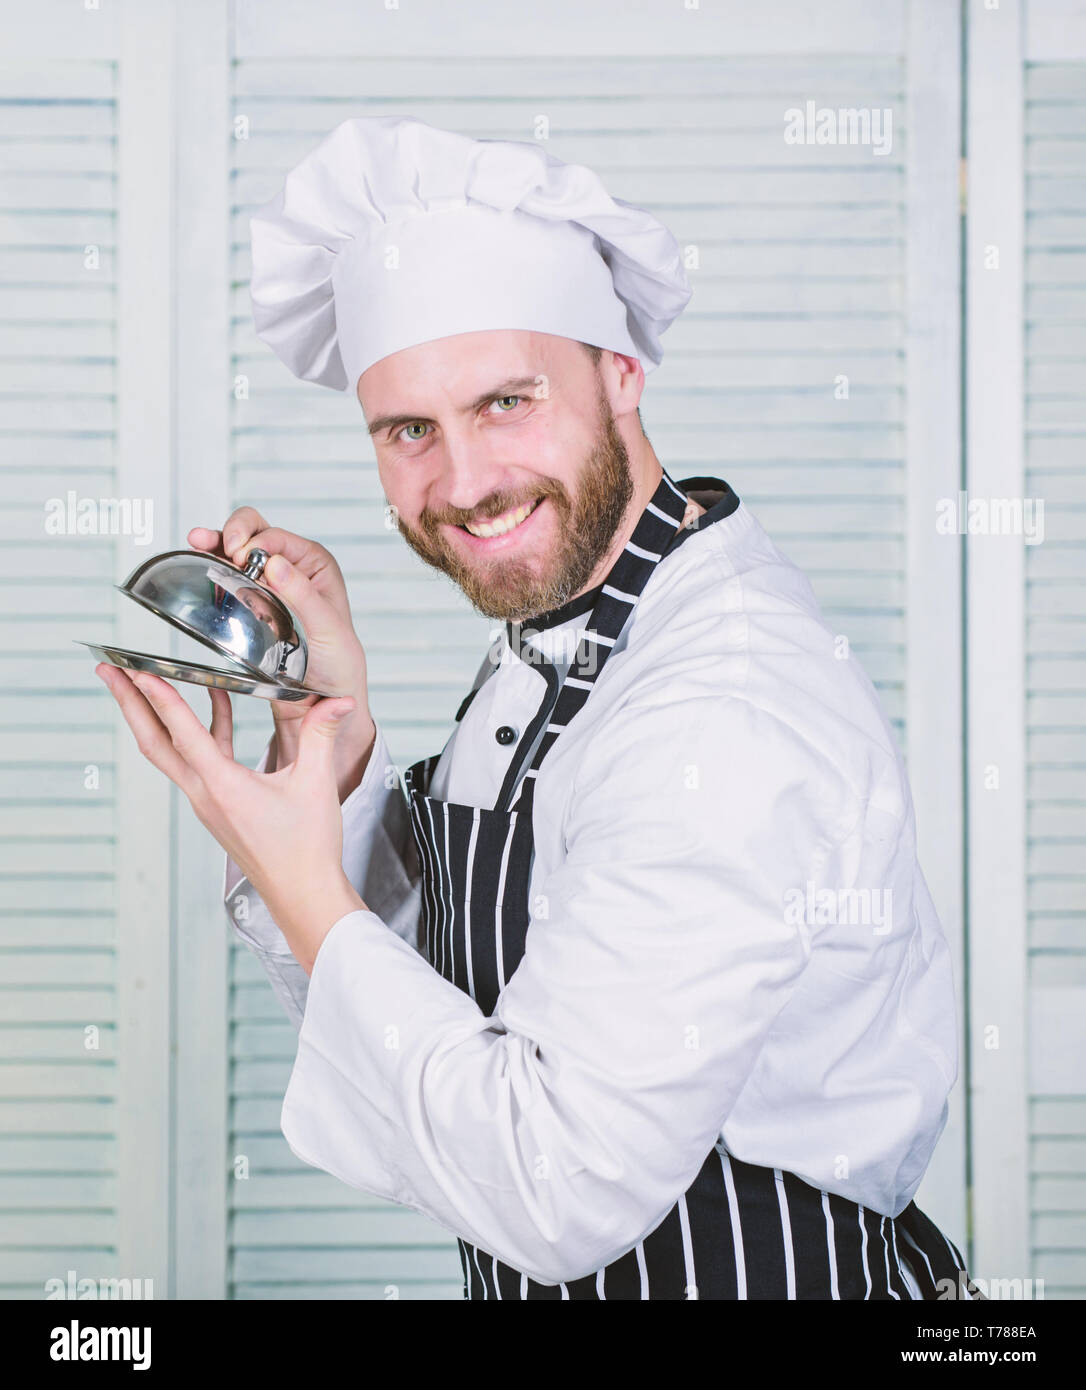 https://c8.alamy.com/comp/T788EA/special-offer-from-chef-dish-of-the-day-chef-ready-for-cooking-confident-man-in-apron-and-hat-hold-tray-professional-in-kitchen-culinary-cuisine-bearded-man-love-food-cook-in-restaurant-T788EA.jpg